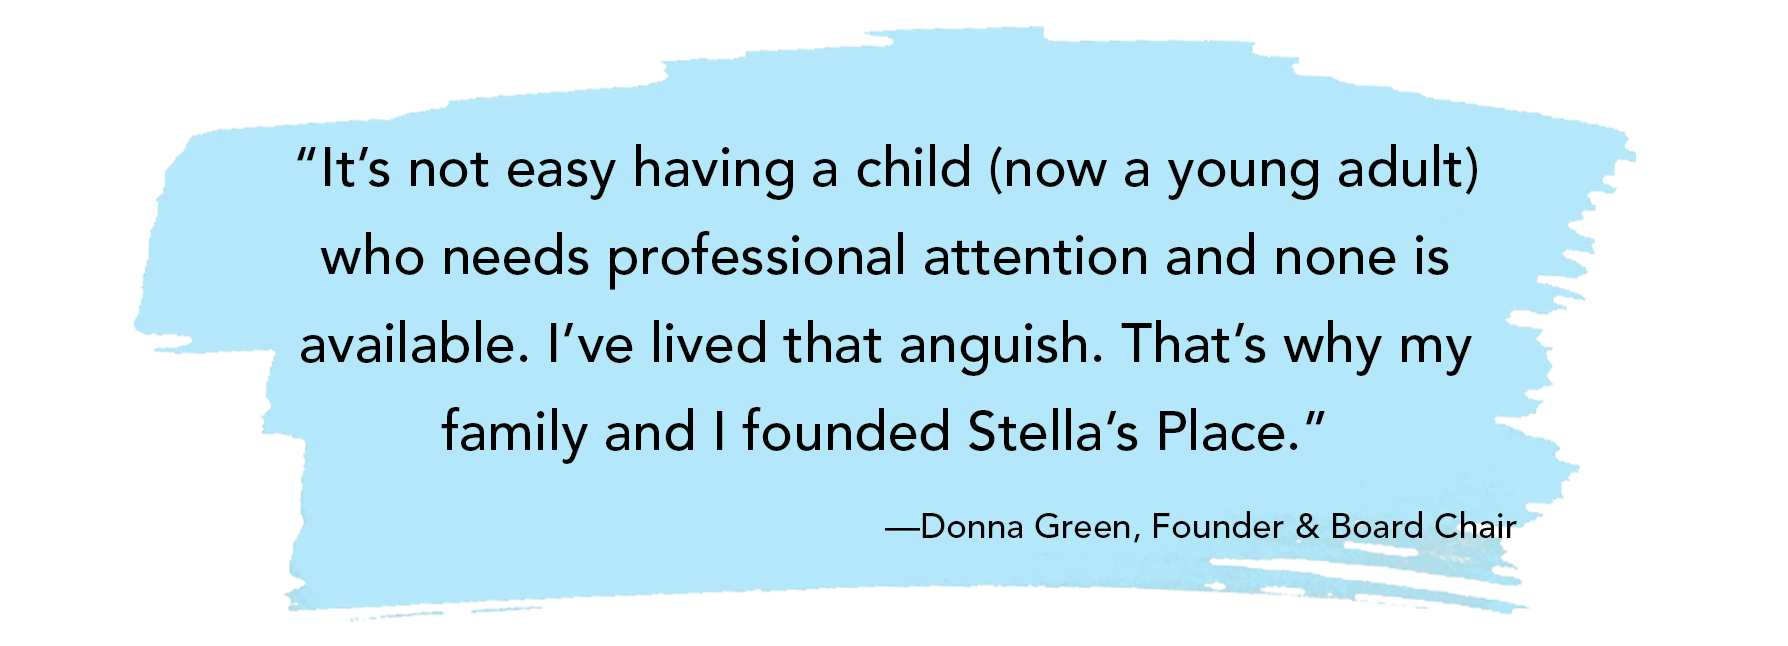 “It’s not easy having a child (now a young adult) who needs professional attention and none is available. I’ve lived that anguish. That’s why my family and I founded Stella’s Place.” —Donna Green, Founder & Board Chair